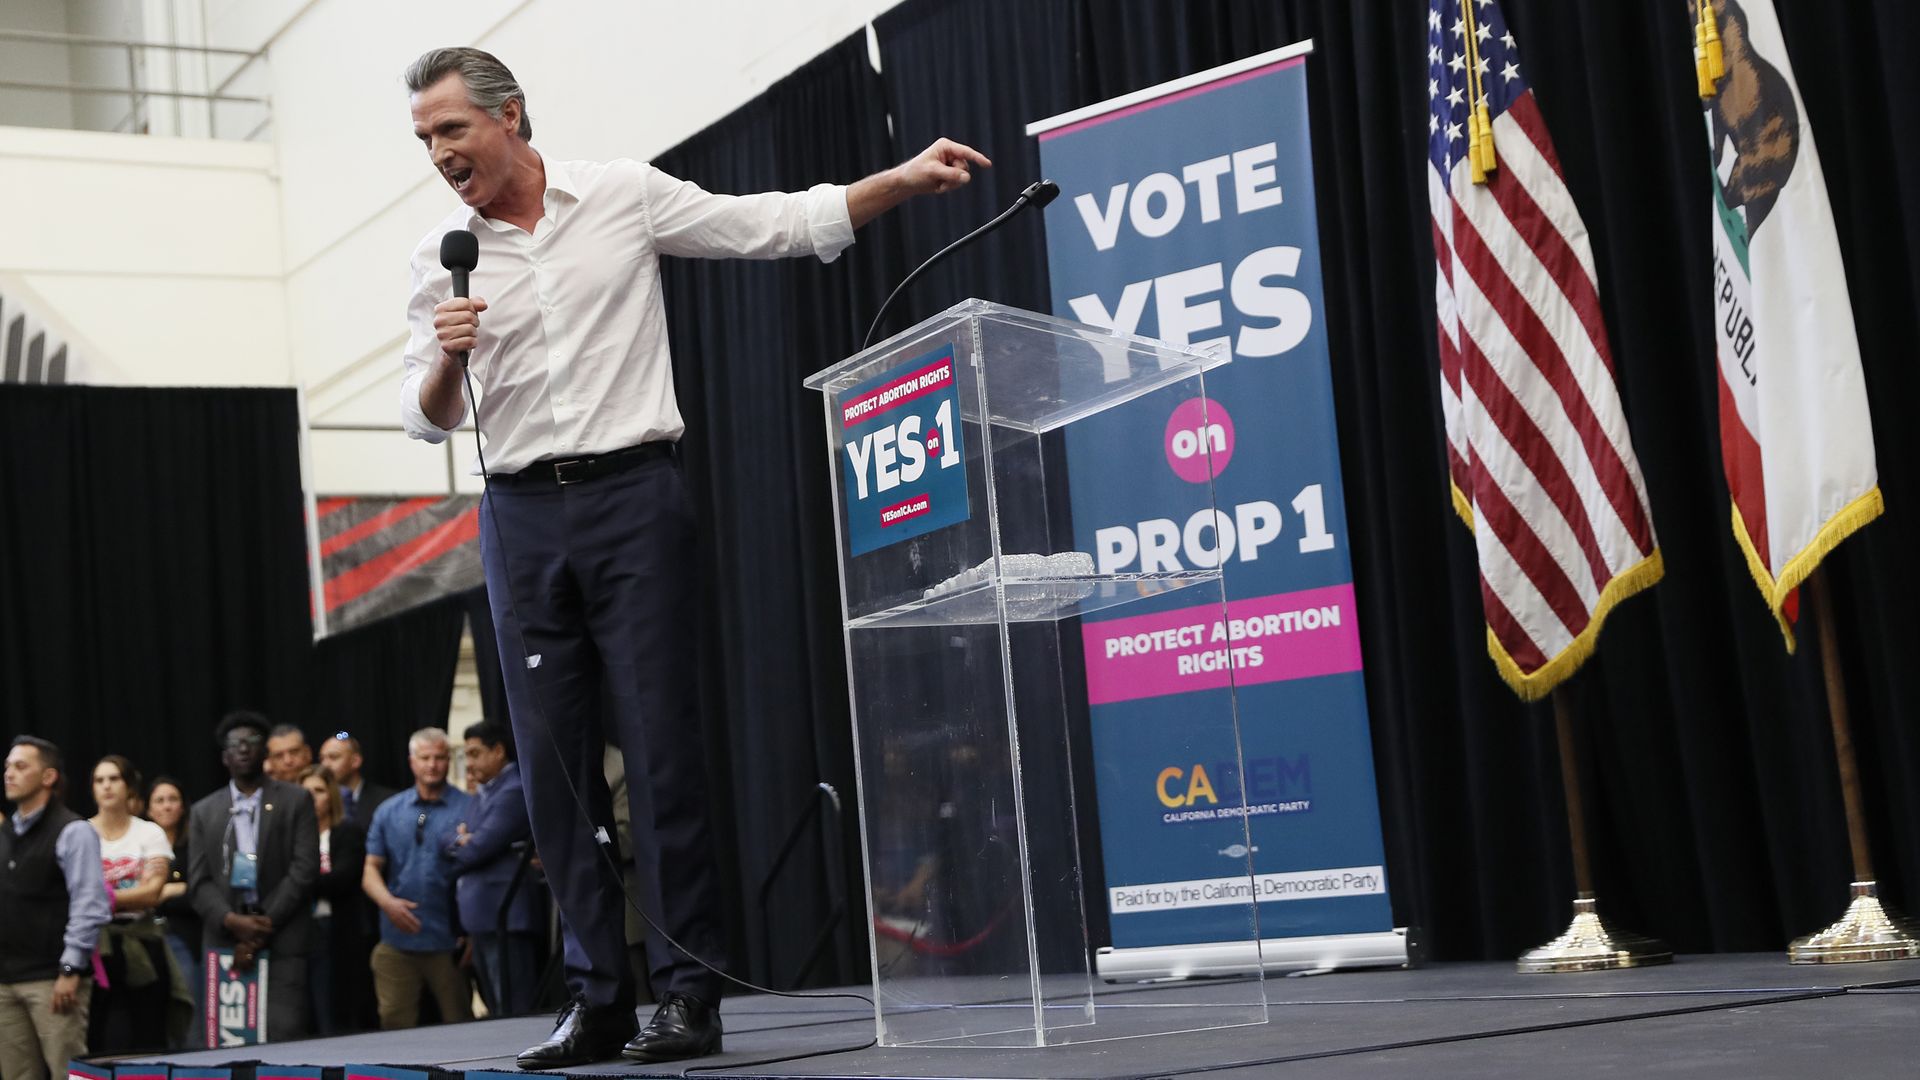 Picture of Gavin Newsom on a stage surrounded by signs that say "Vote Yes on Prop 1"